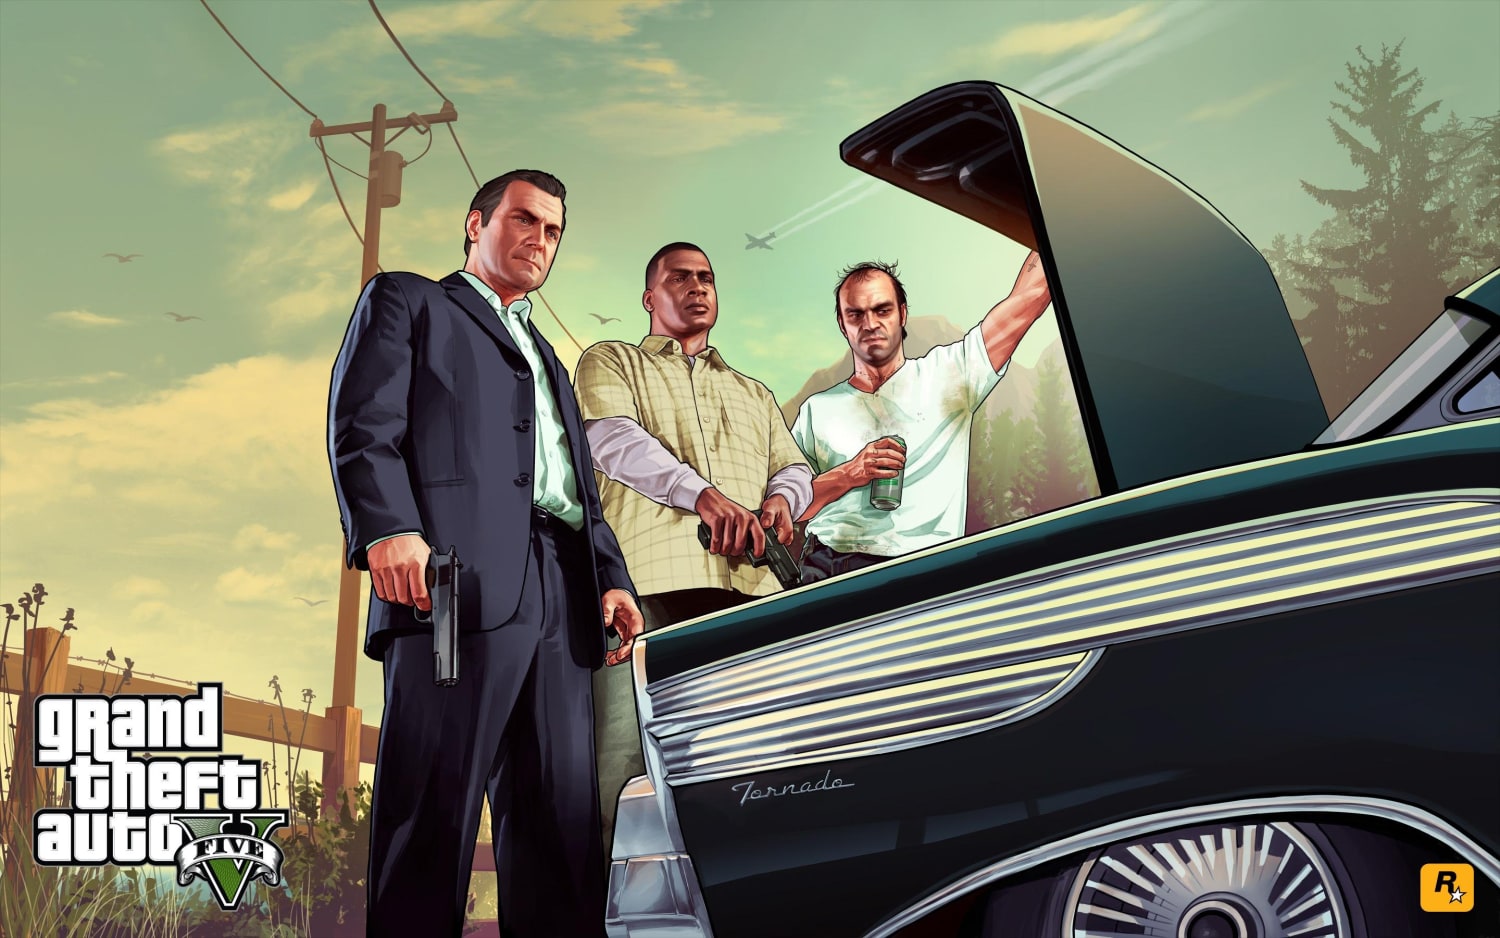 Grand Theft Auto - Video games that GTA made possible, gta v 